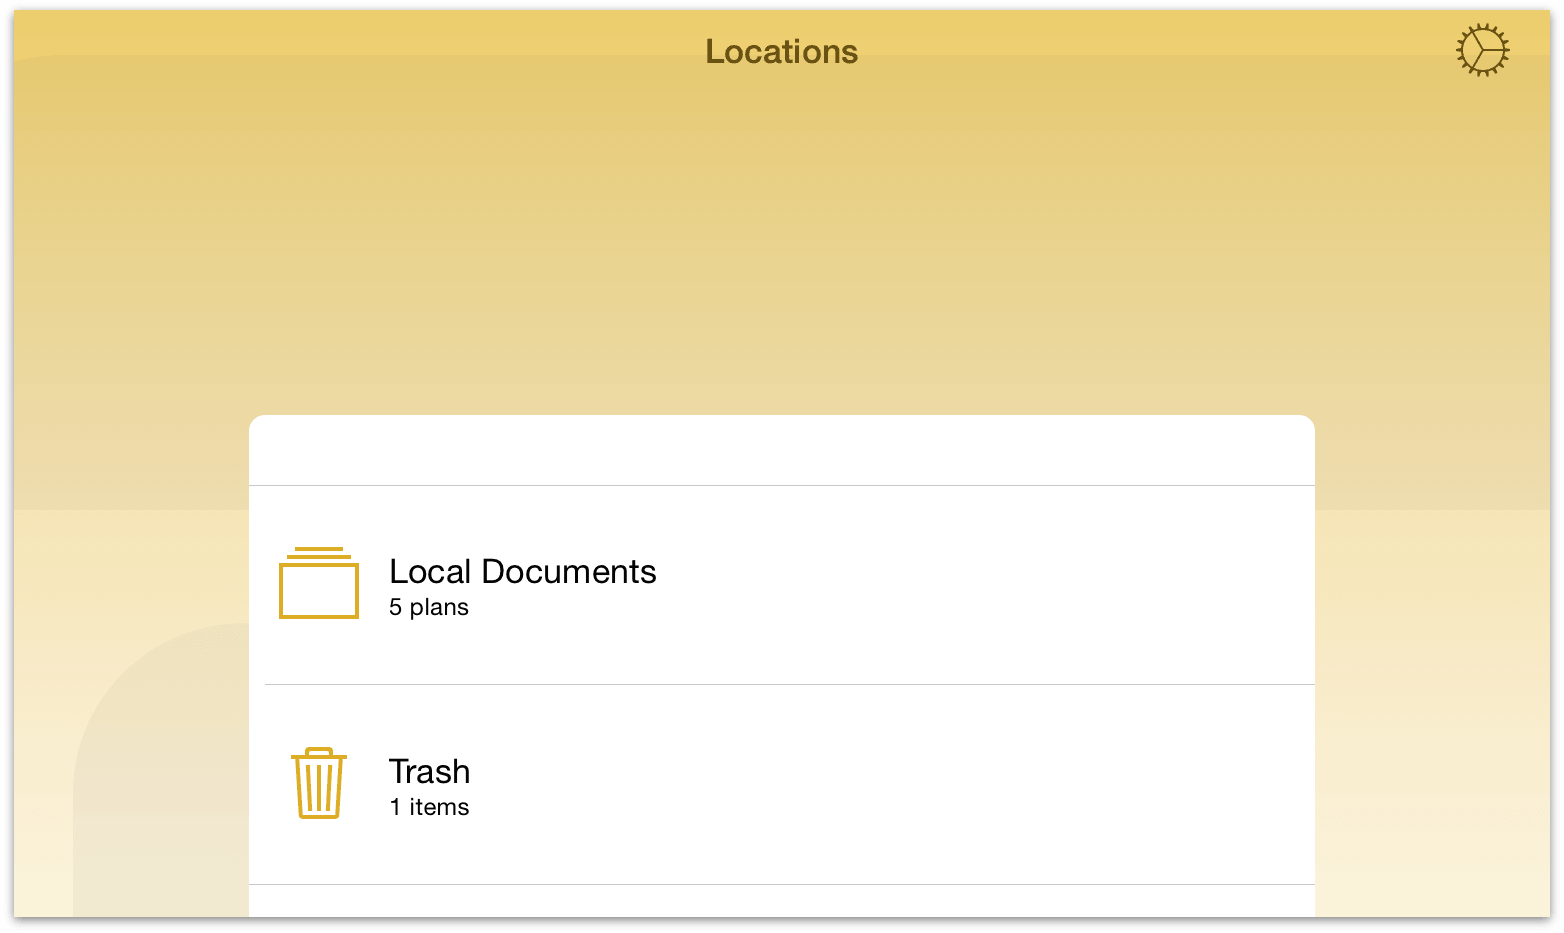 The Trash folder is displayed below Local Documents on the Locations screen.